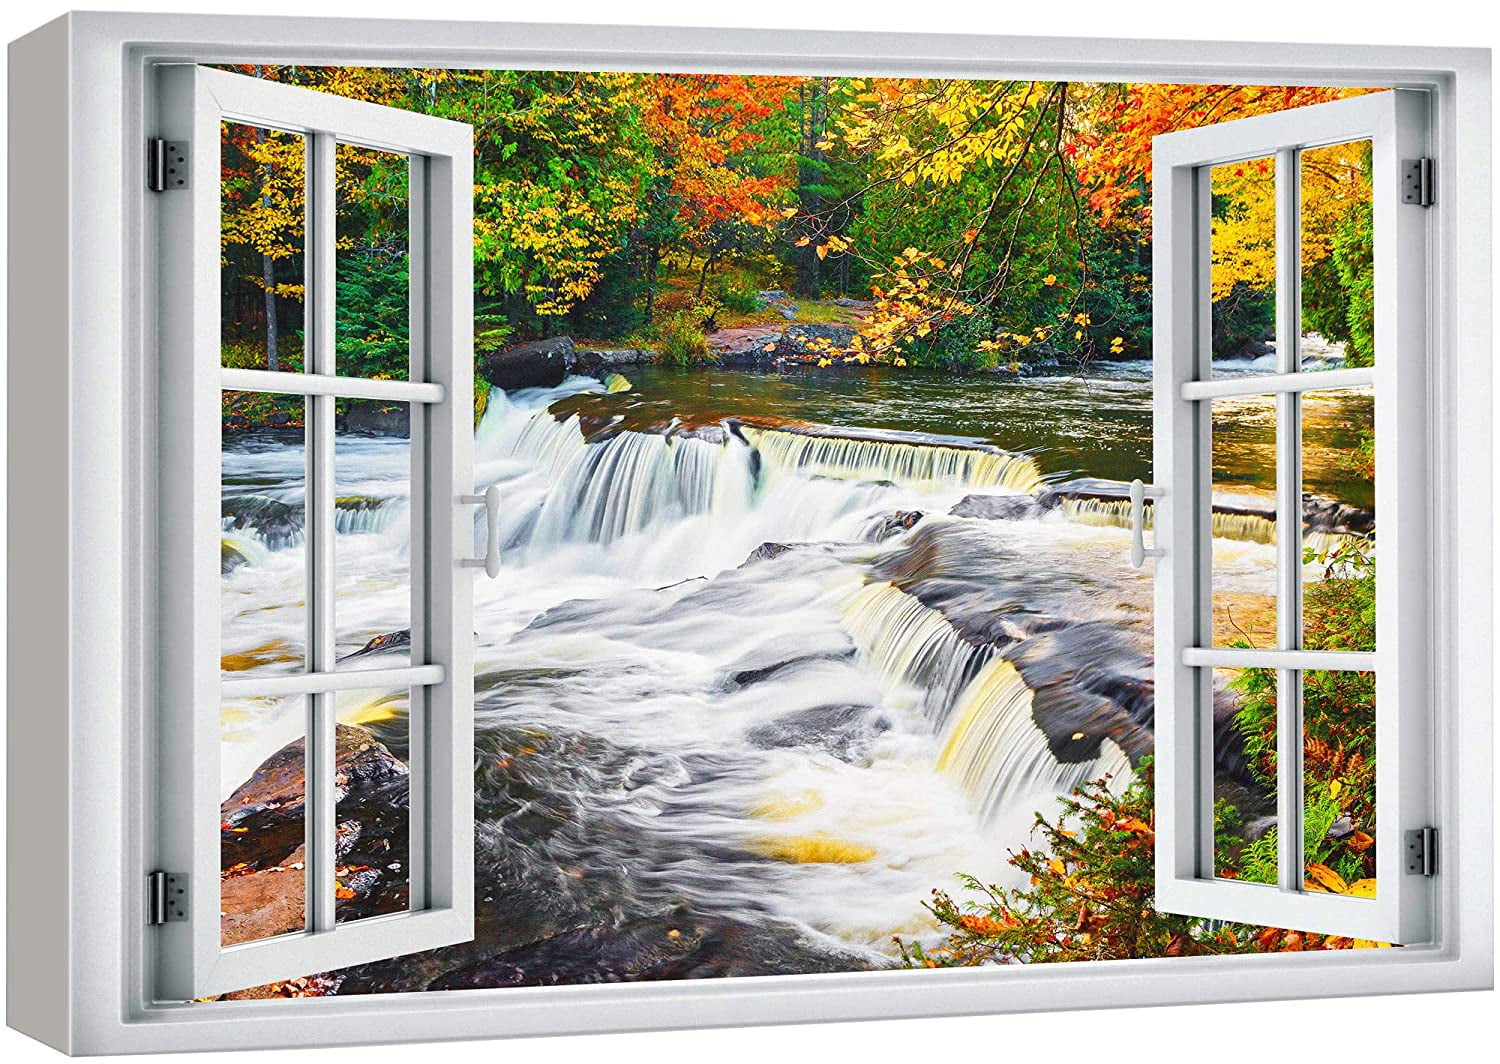 wall26 Canvas Print Wall Art Window View Rustic Autumn Fall Forest River  Rapids Wilderness Nature Photography Realism Scenic Landscape Colorful  Multicolor for Living Room, Bedroom, Office 12